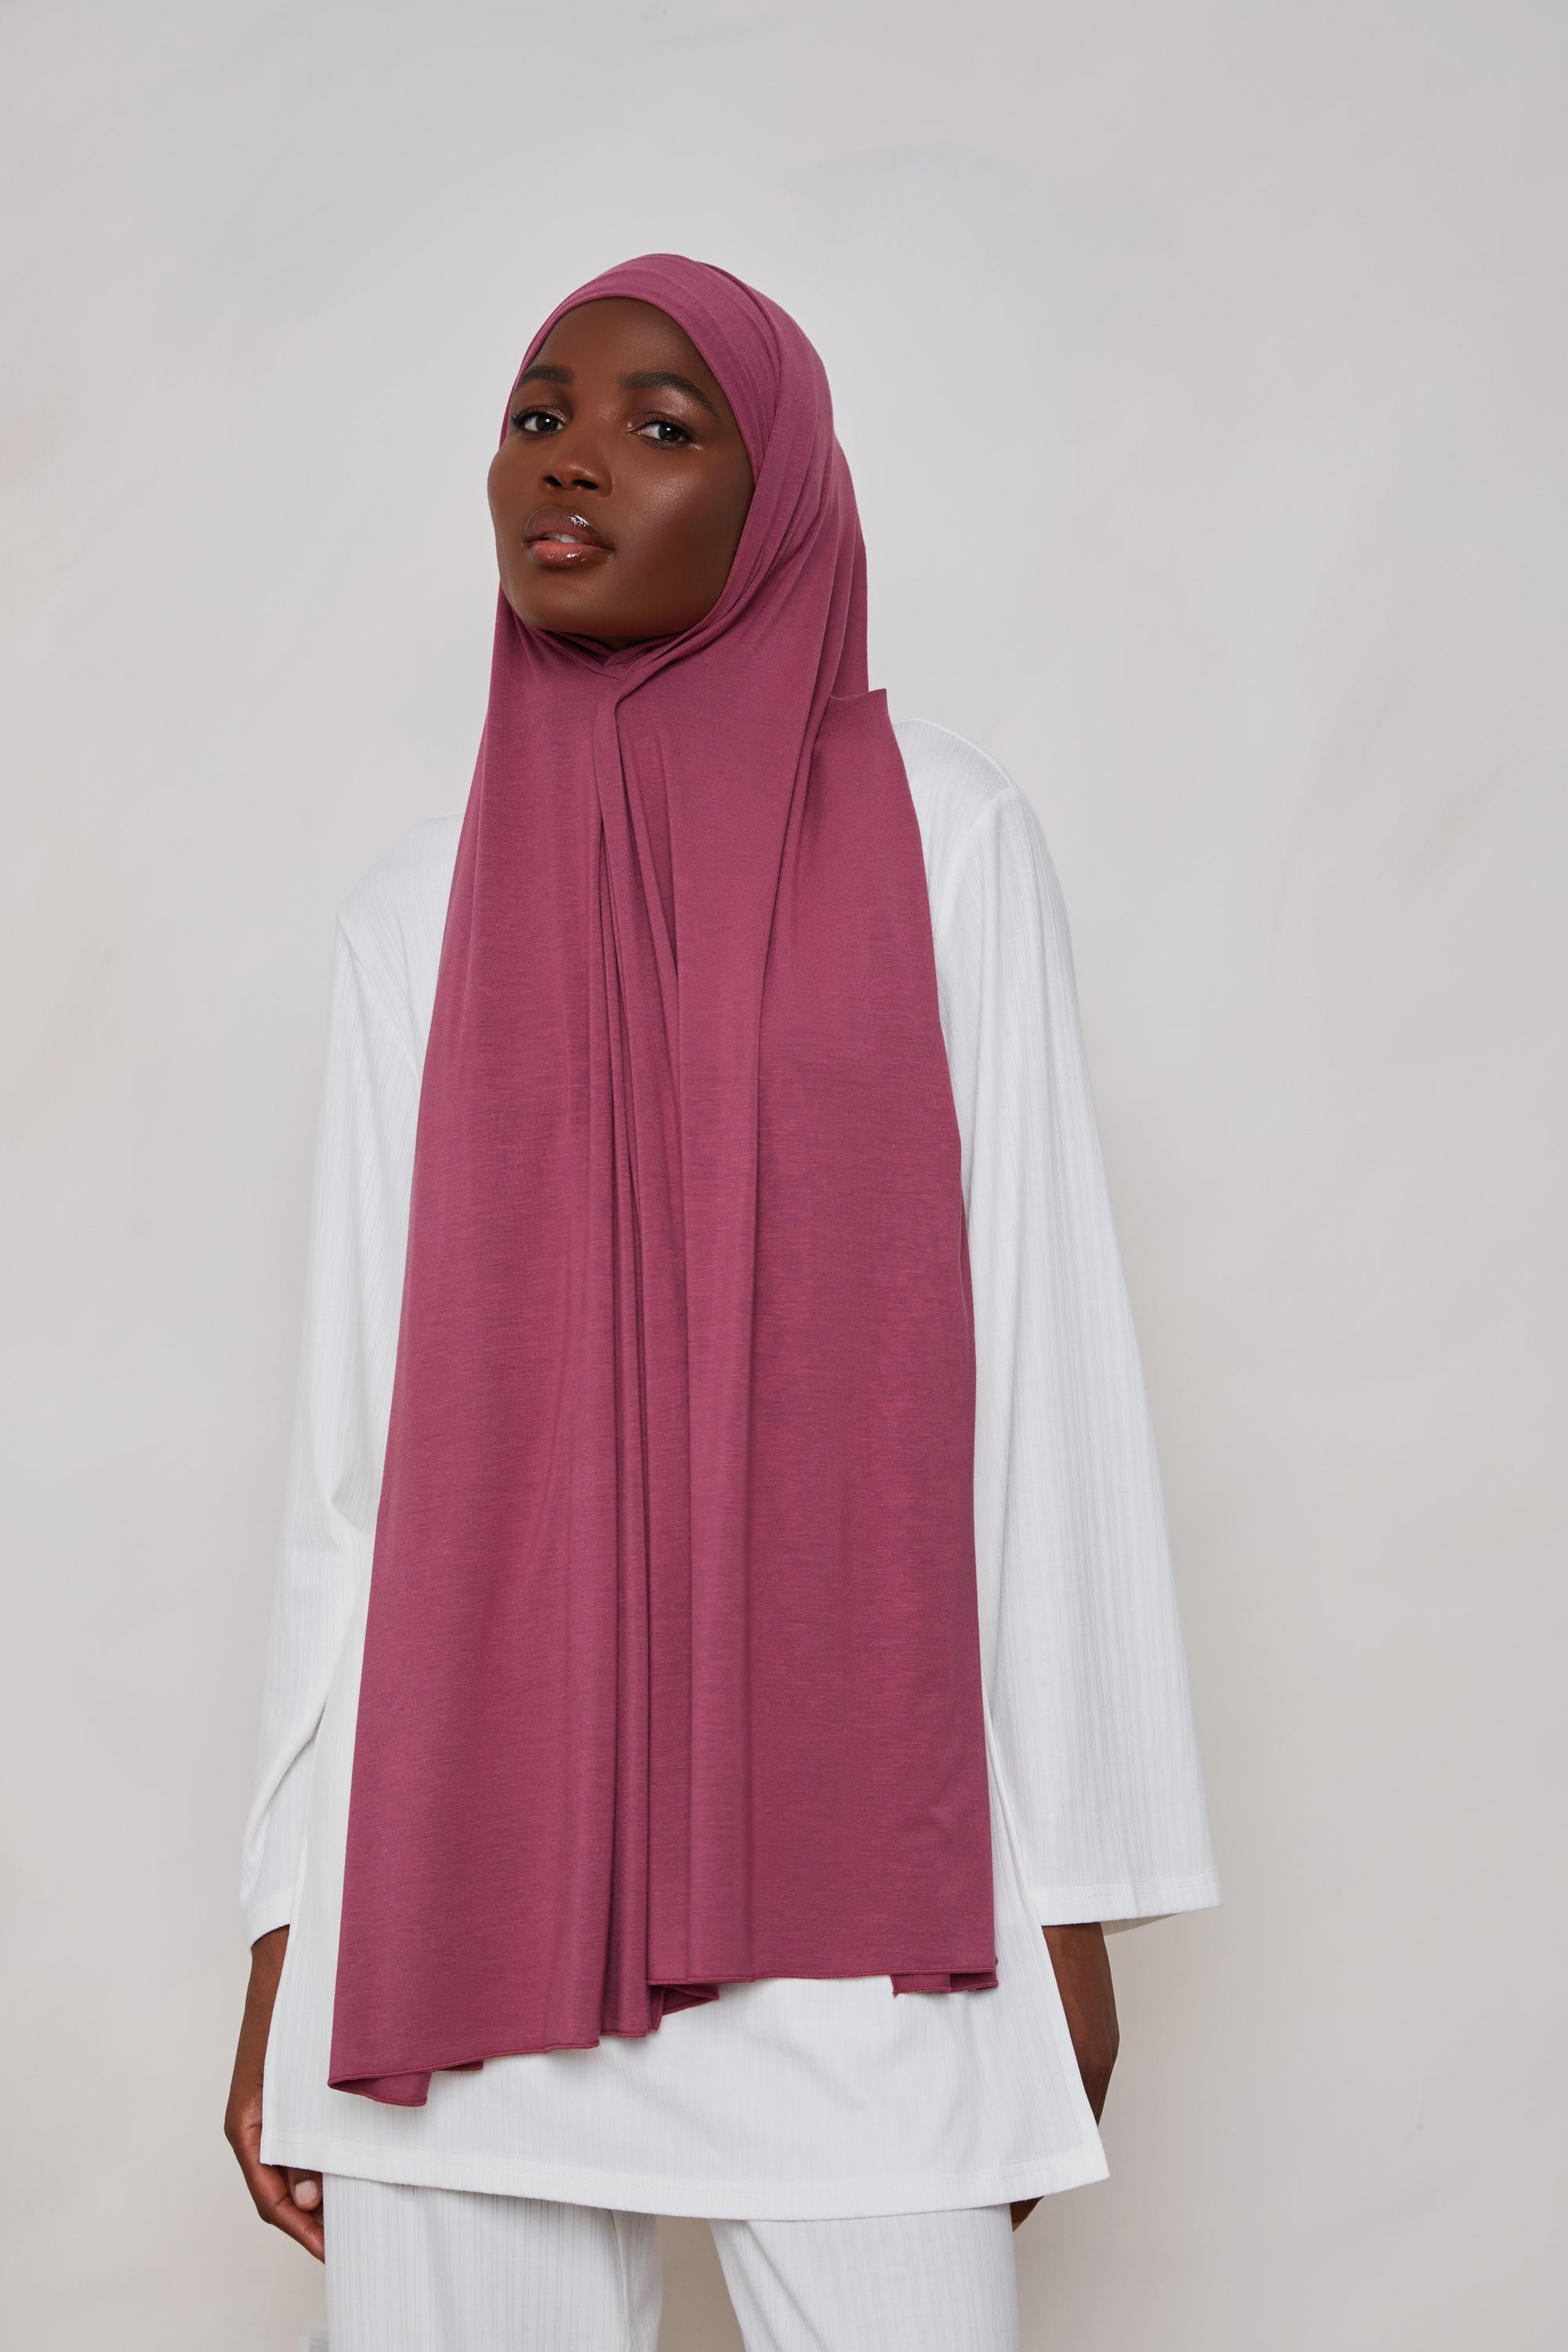 Bamboo Jersey Hijab - Dry Rose epschoolboard 